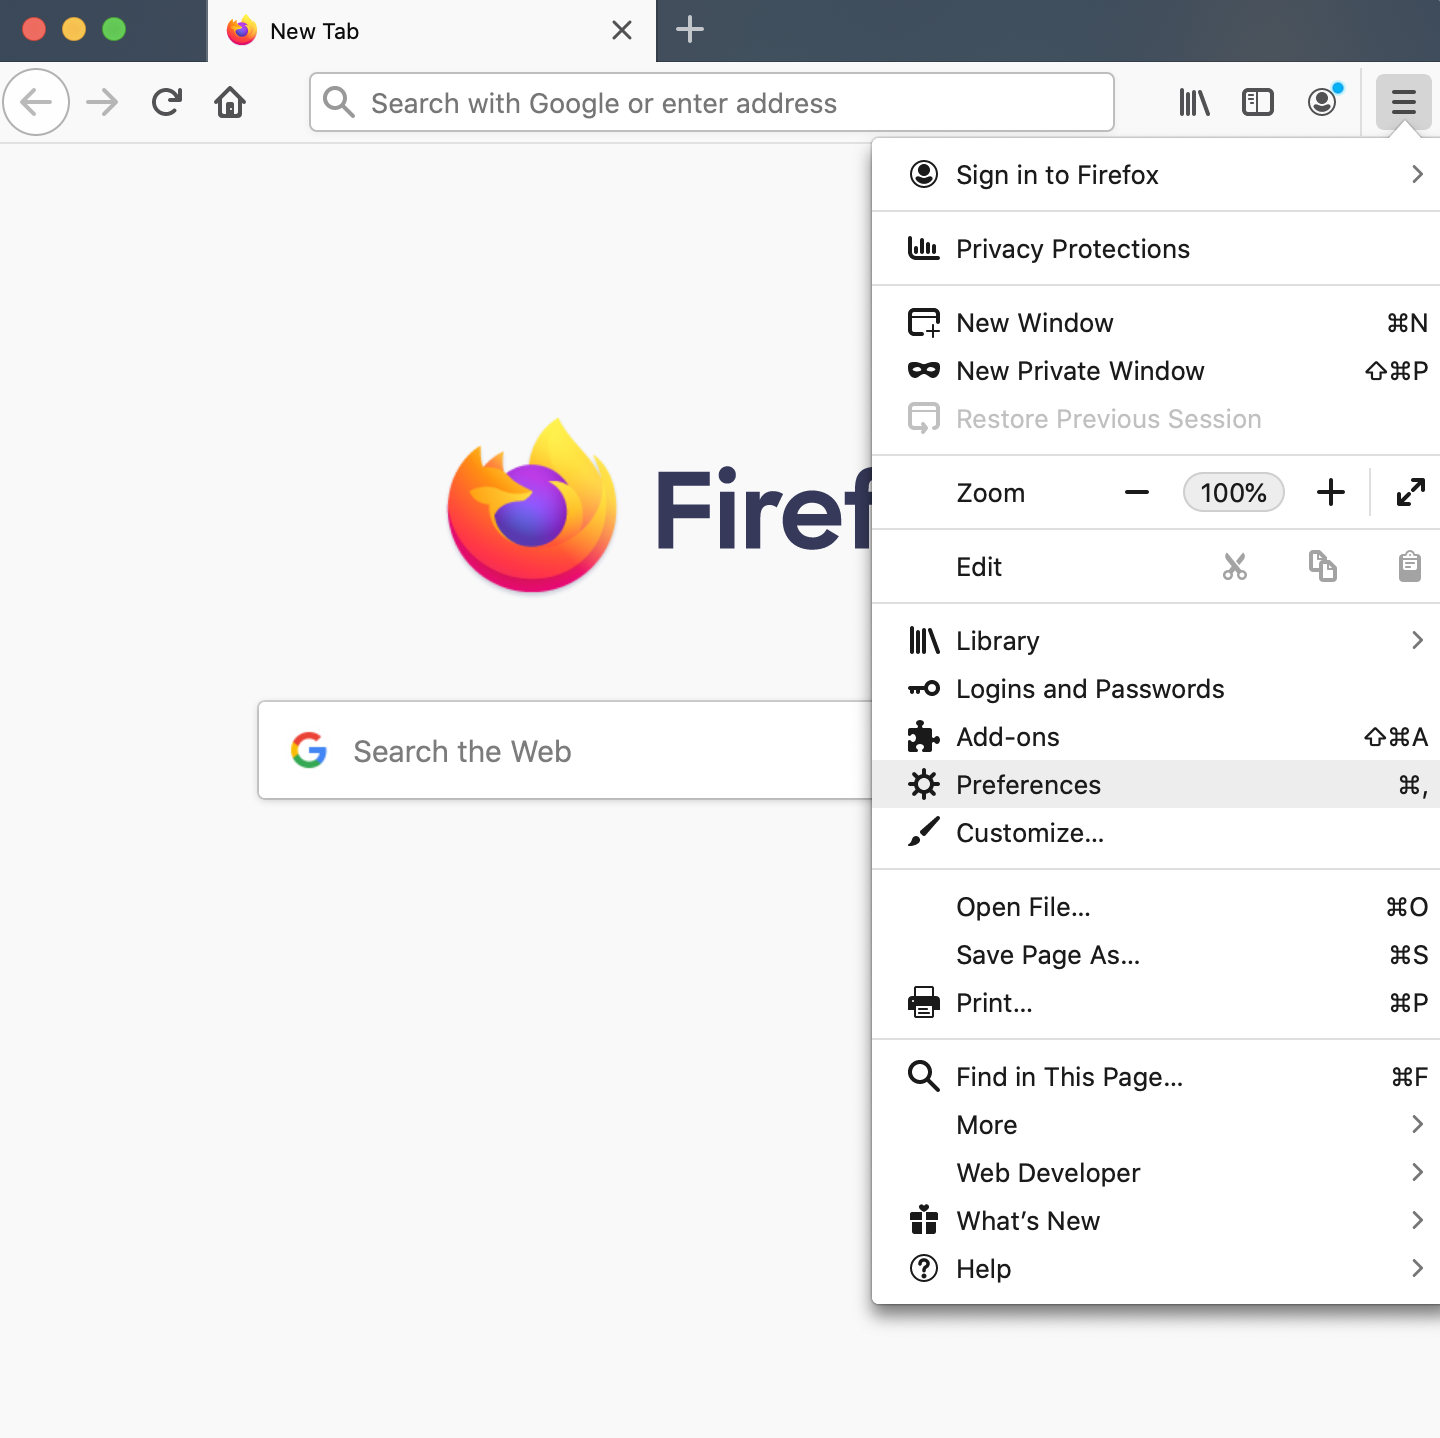 Options dropdown in Mozilla Firefox browser, 'Preferences' selected